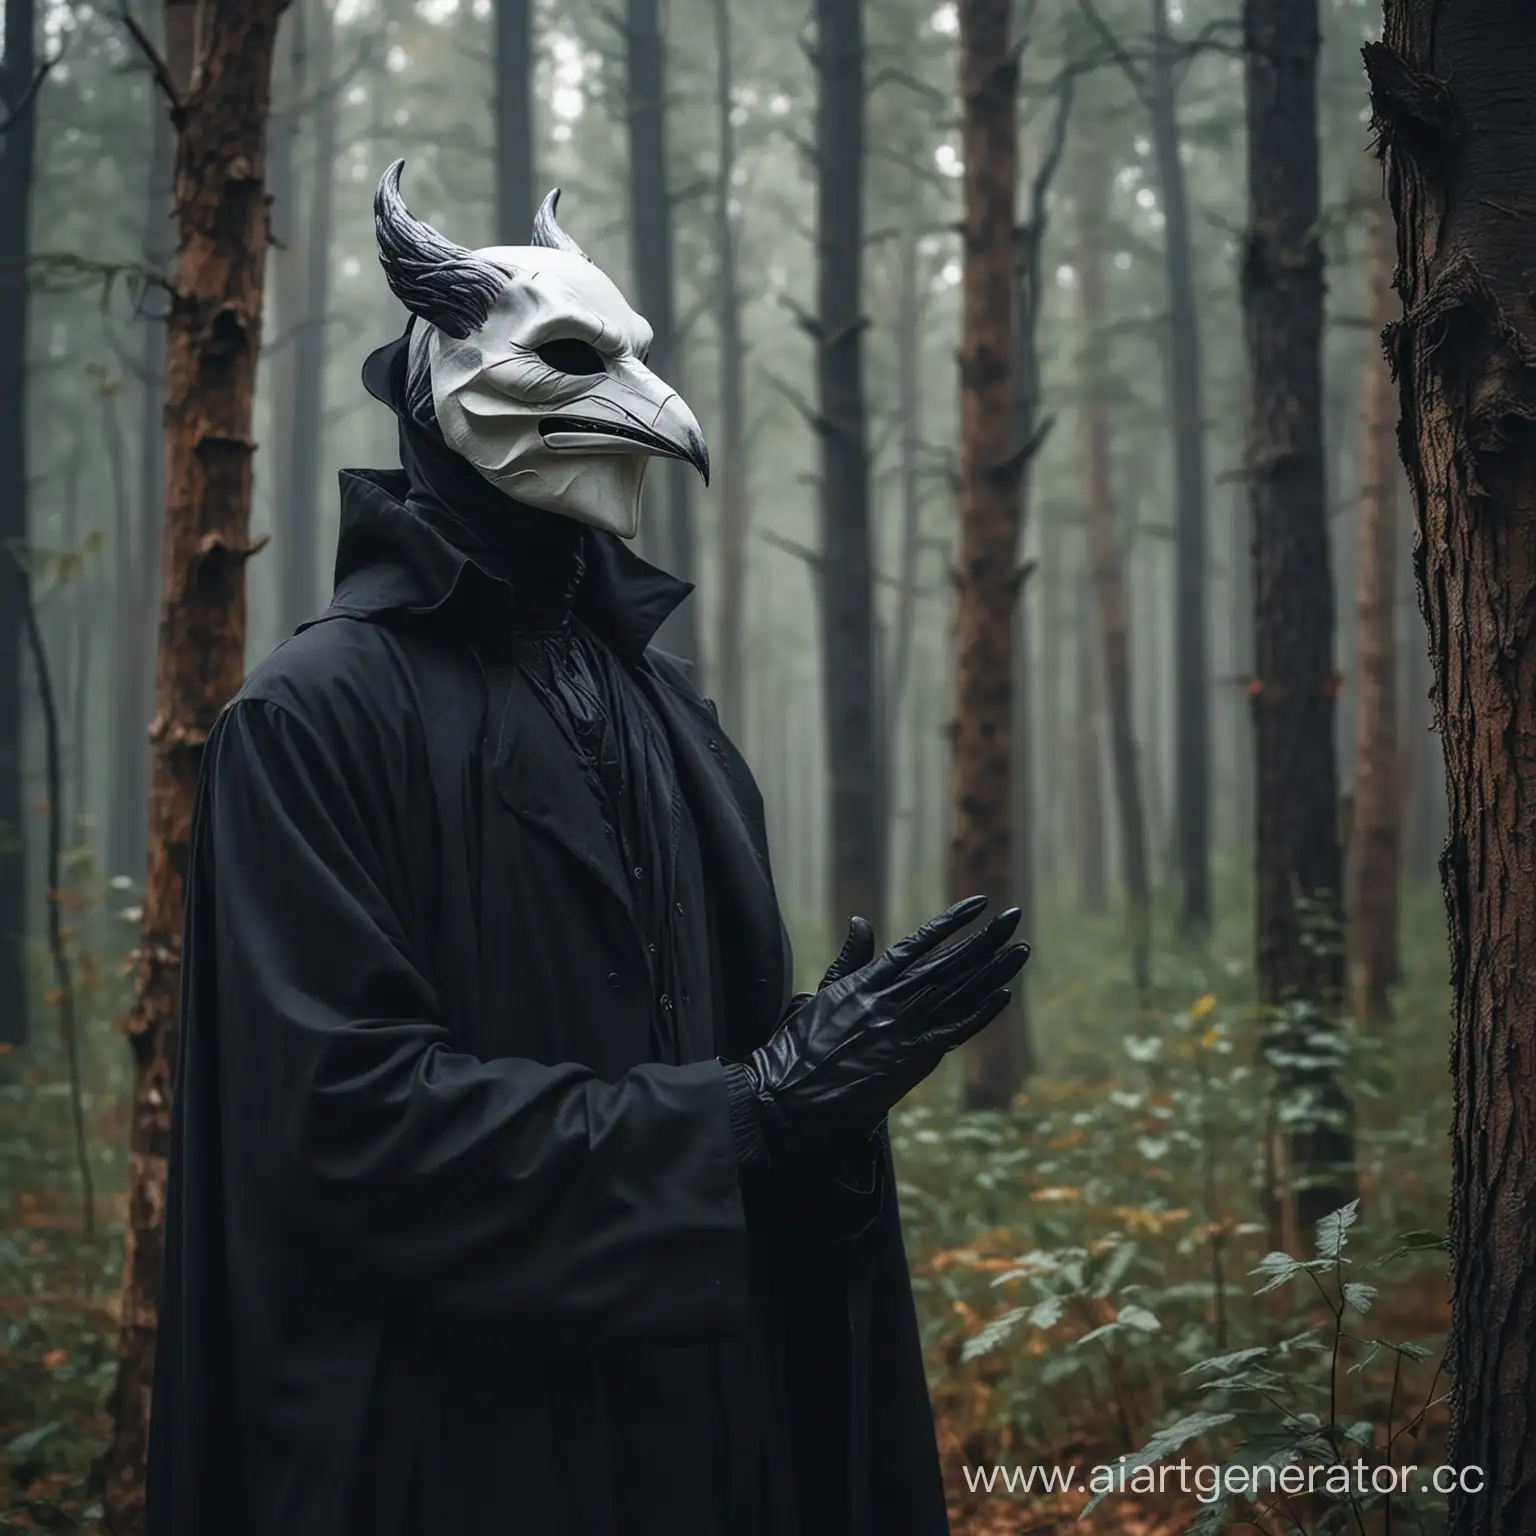 Majestic-Omnipotent-Figure-in-Dark-Coat-and-Raven-Mask-Amidst-Enchanting-Forest